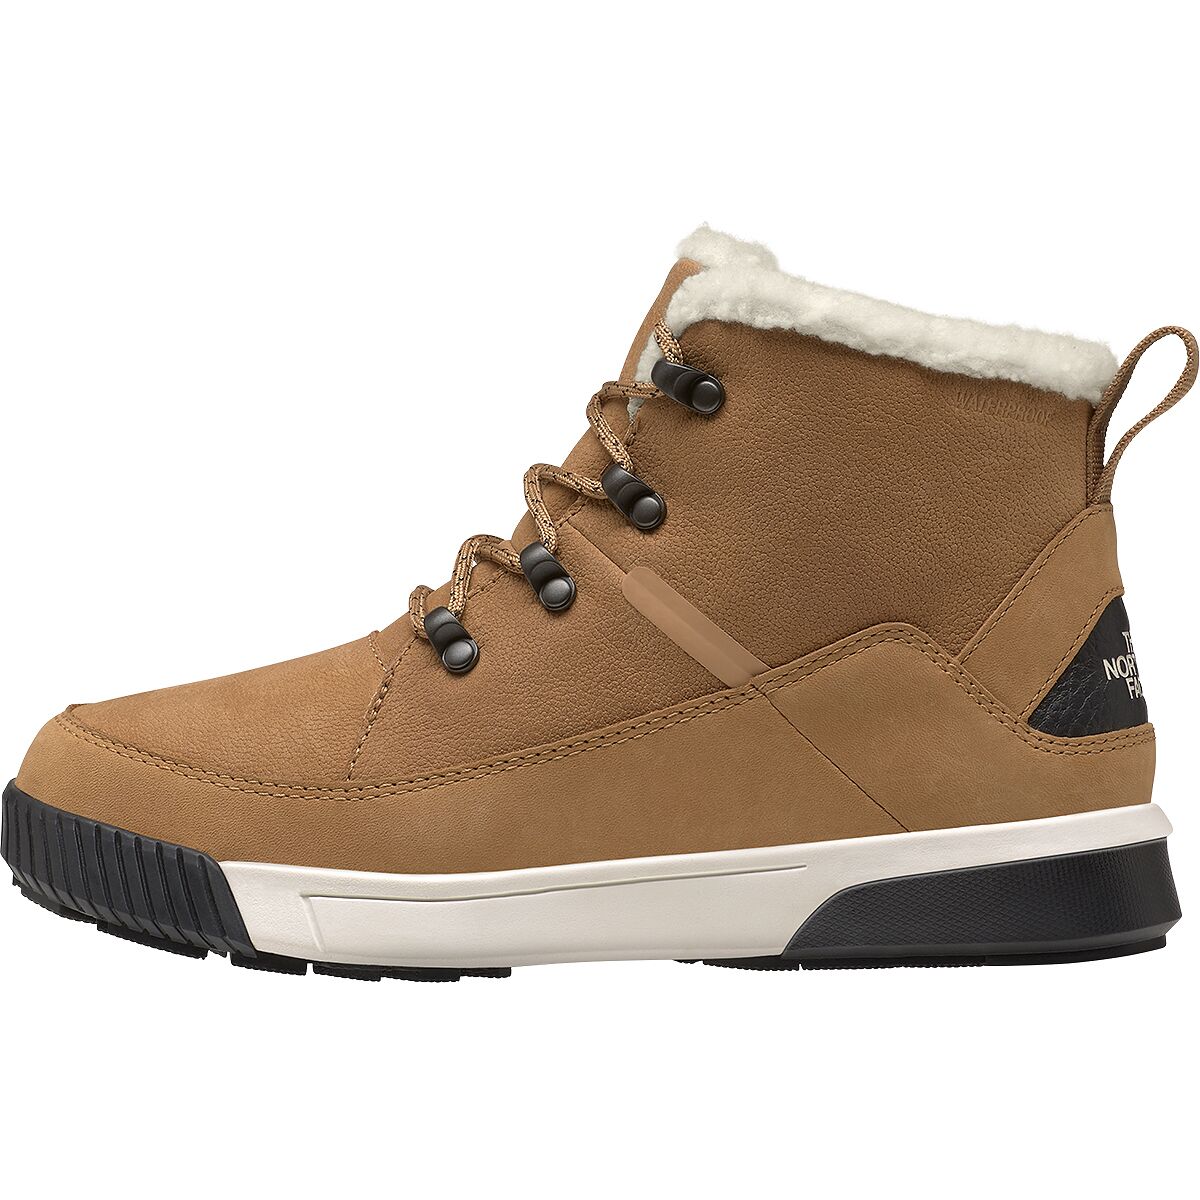 The North Face Sierra Mid Lace Waterproof Boot - Women's